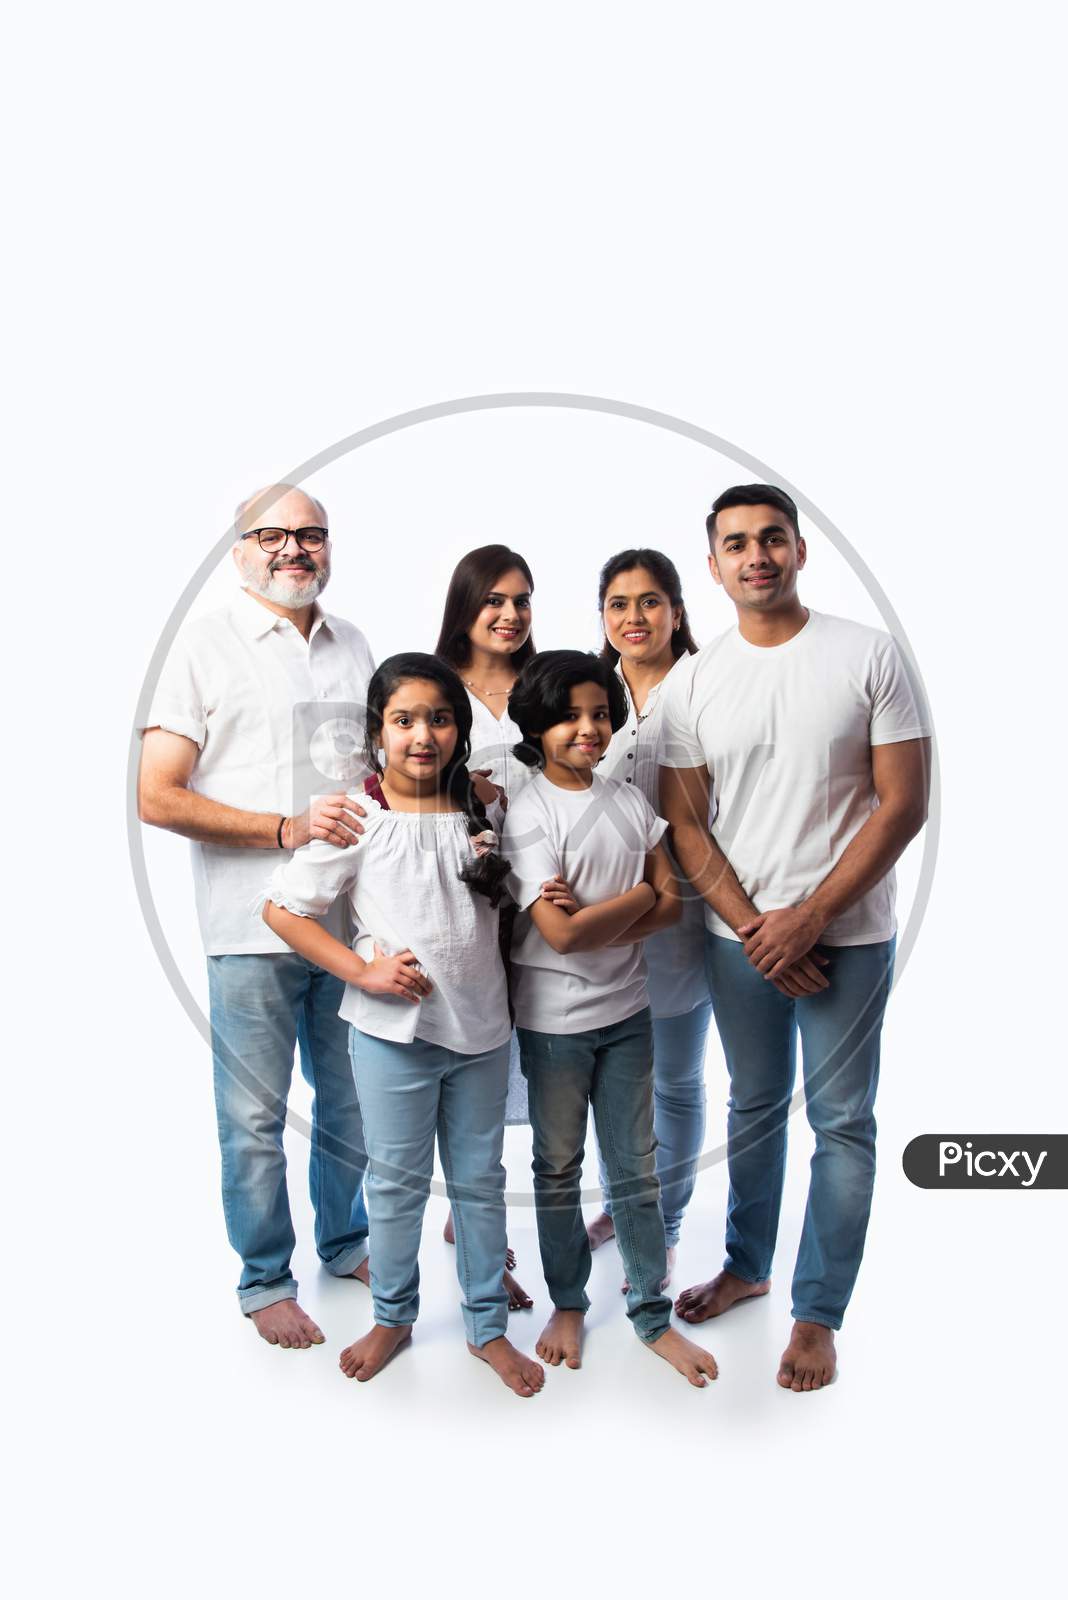 Portrait Of Indian Family With Grandparents, Parents & Kids Against White Background In White Cloths